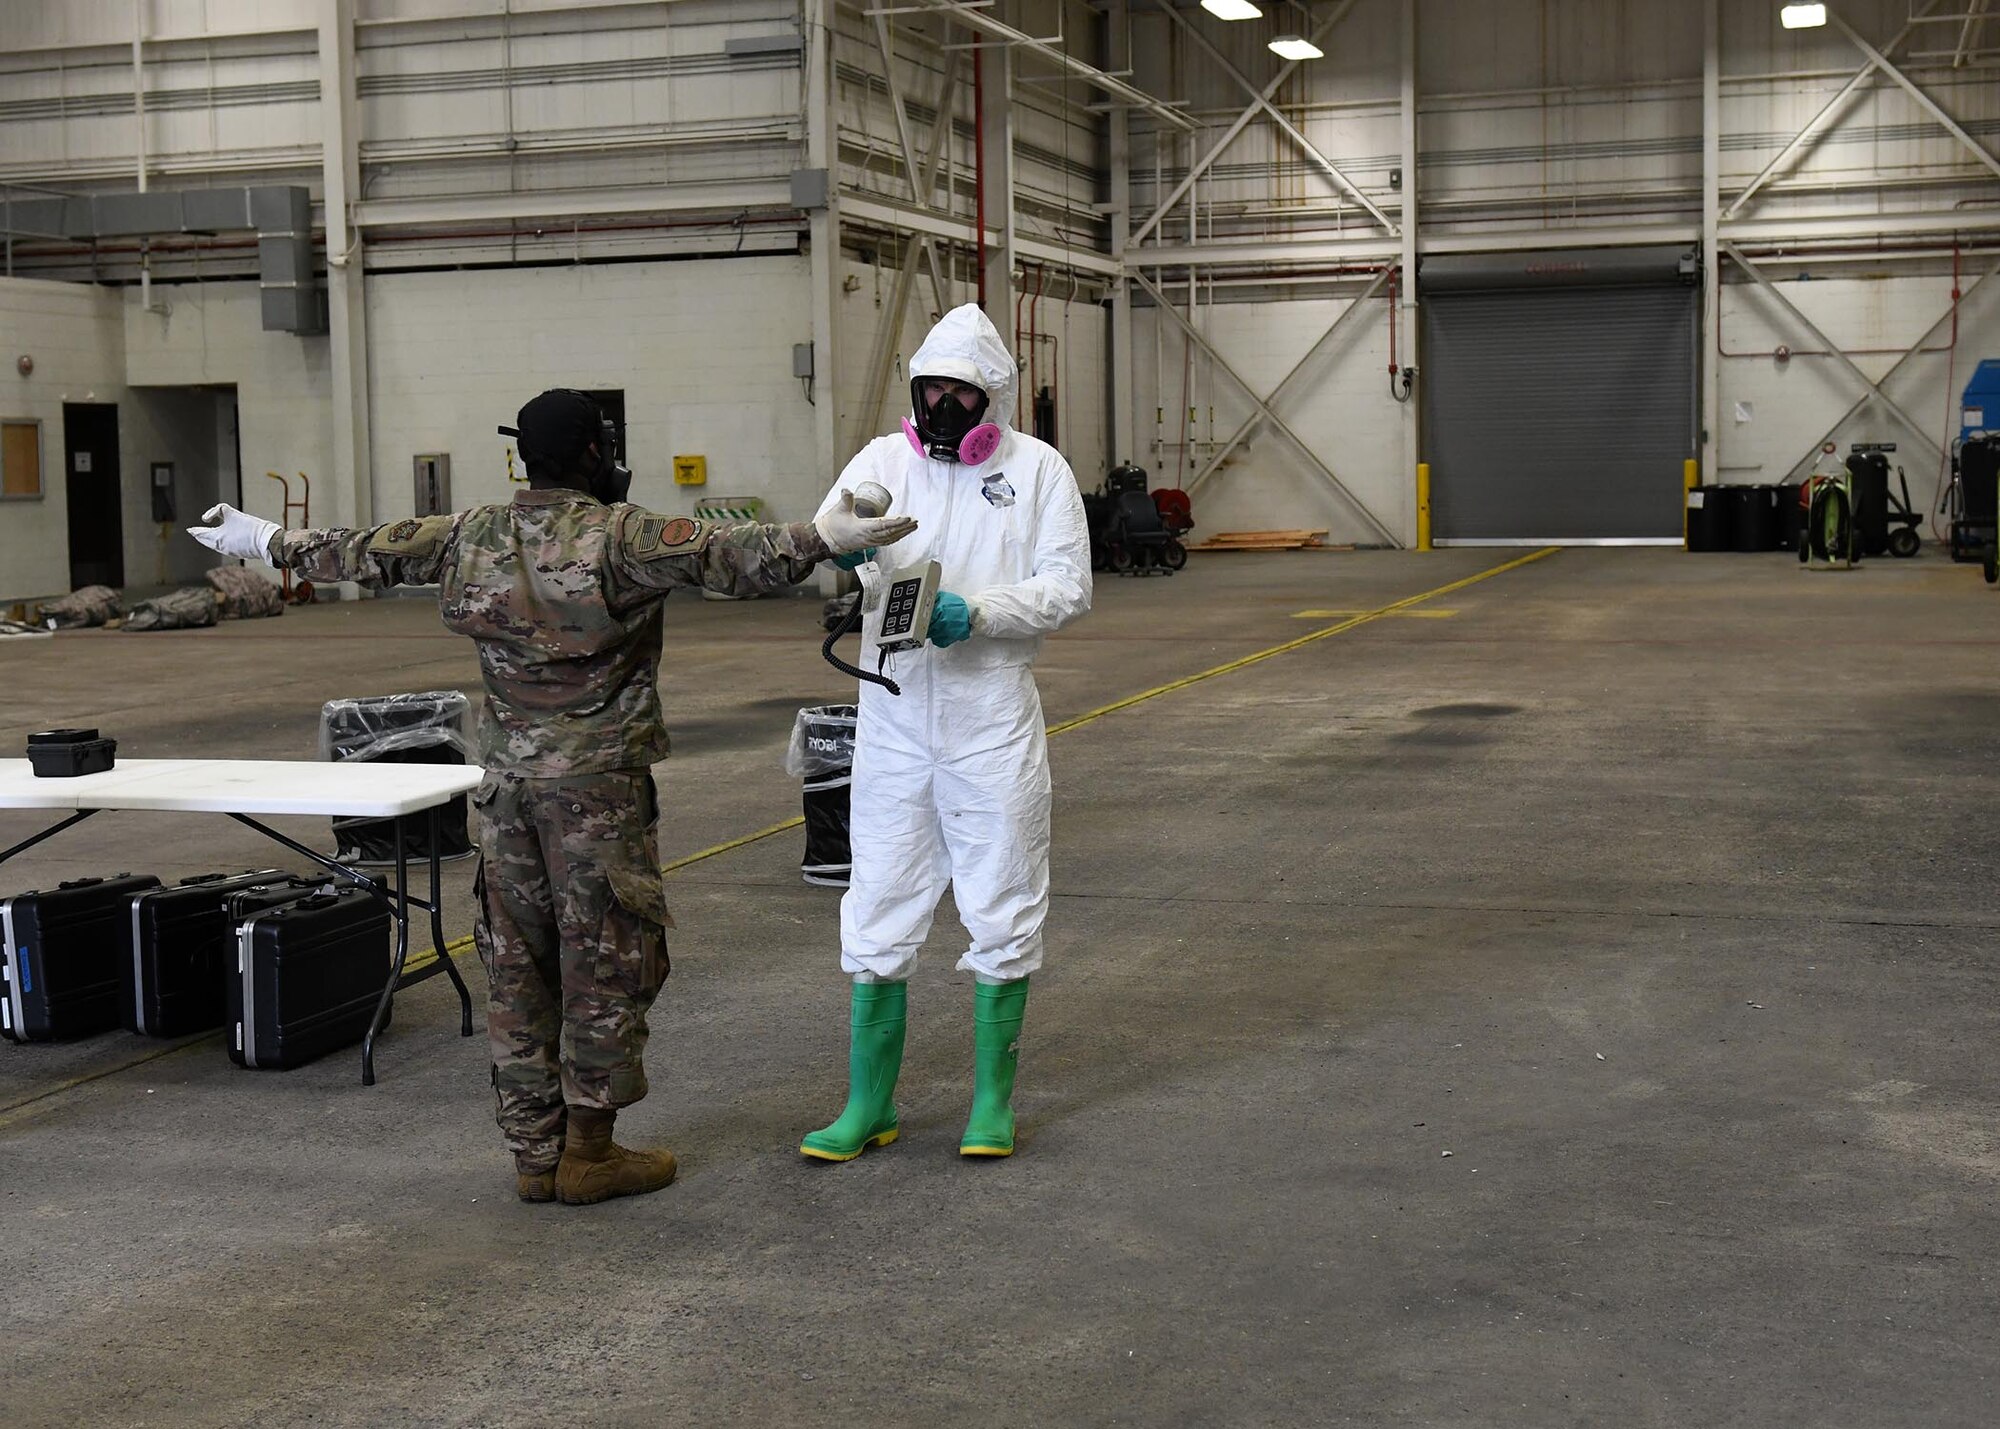 An Airman checks another Airman for simulated radiation with a small grey tool.